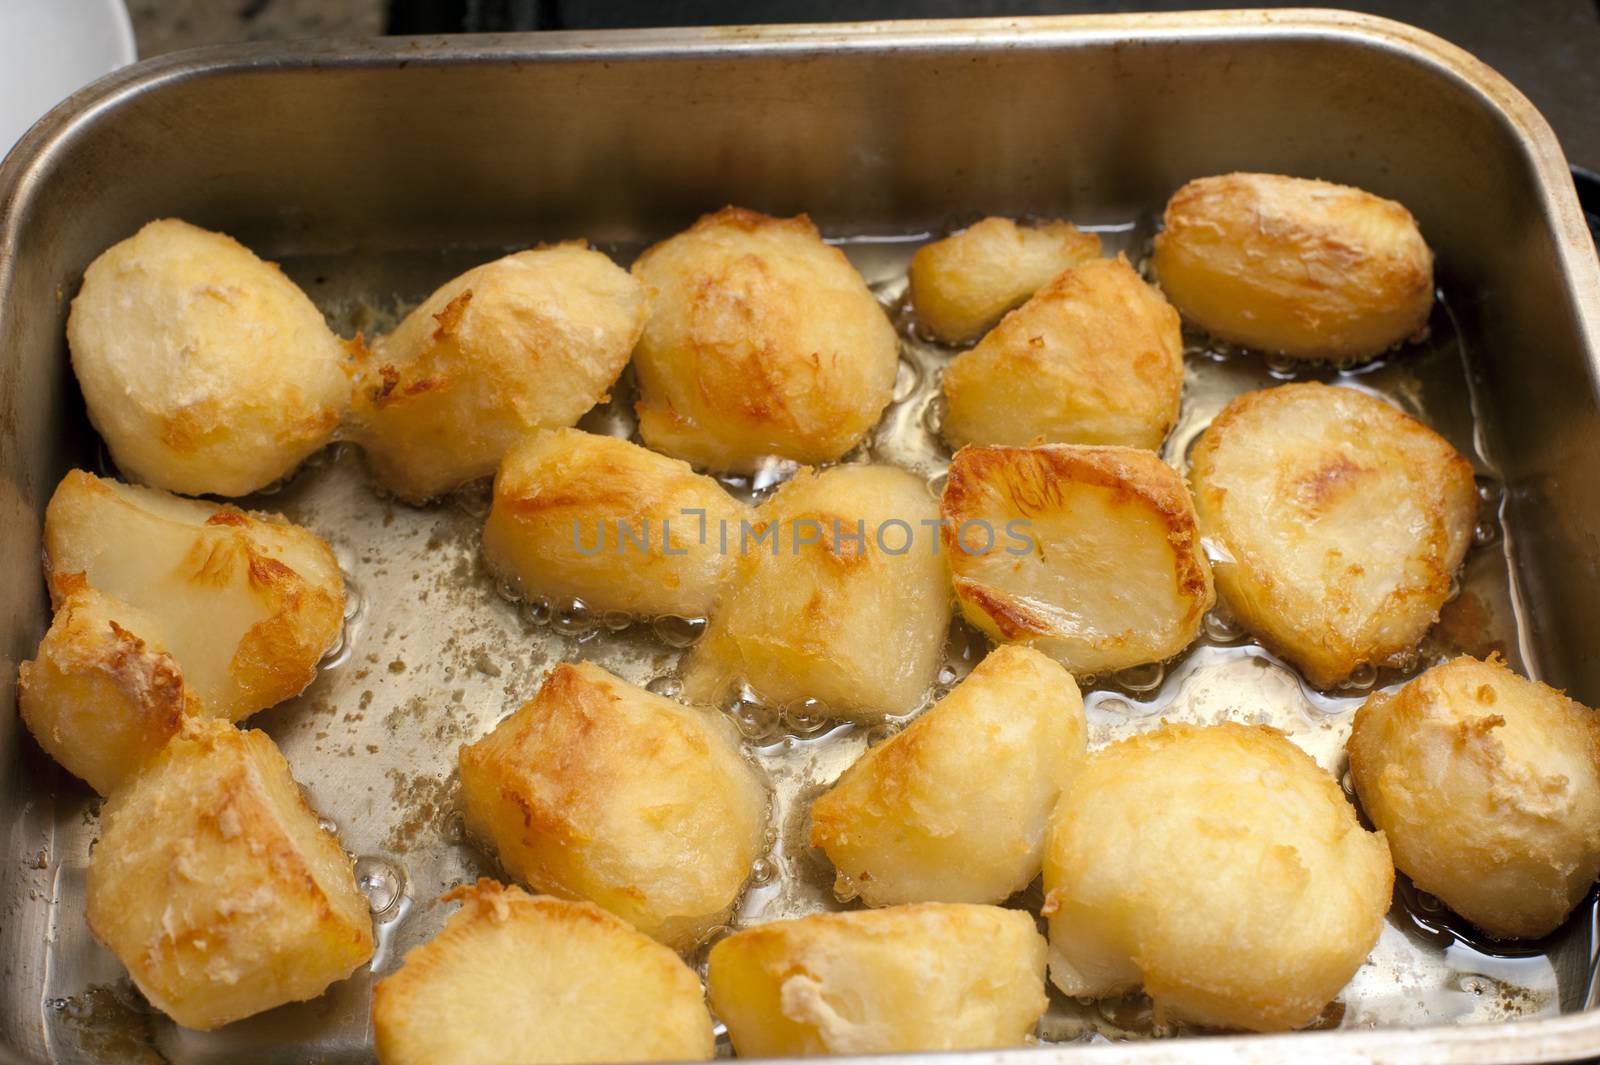 Delicious golden crispy roast potatoes in a baking tray fresh from the oven, high angle view